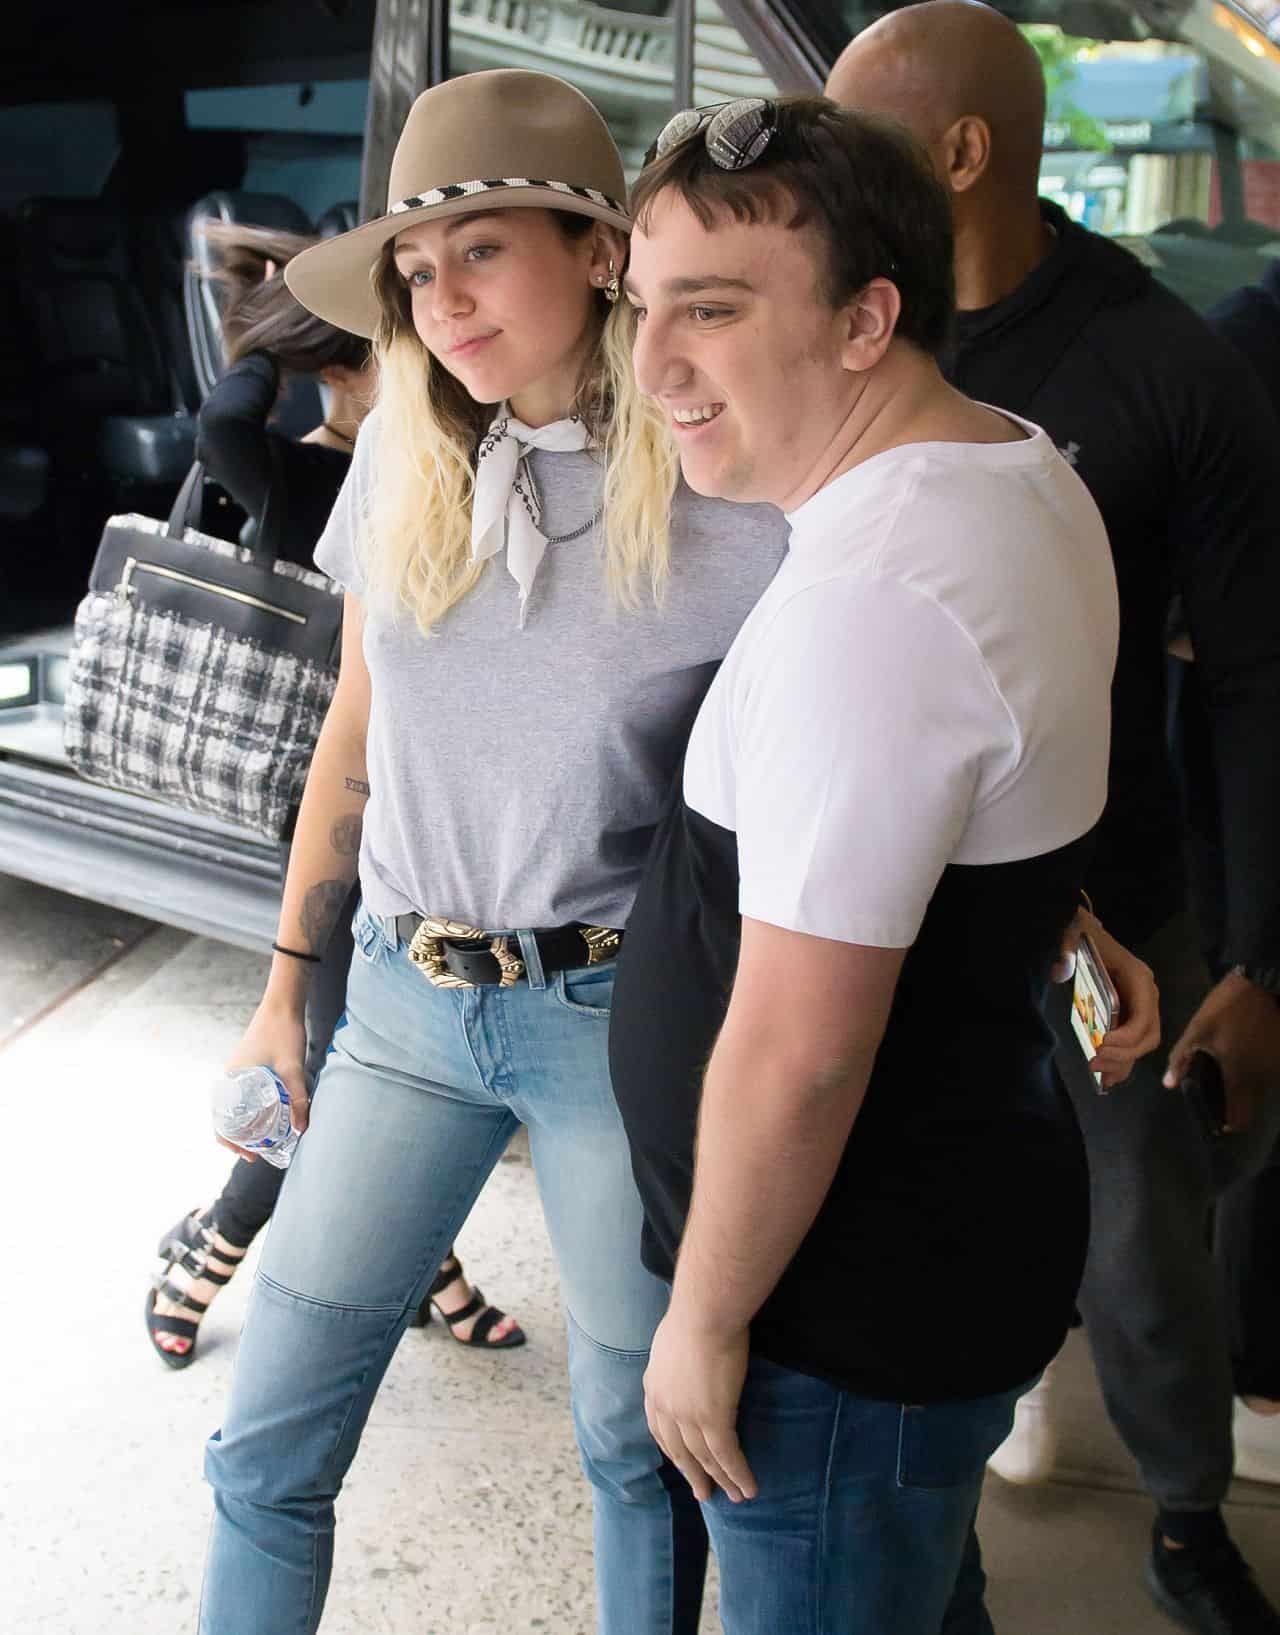 Miley Cyrus Showcases Her Iconic Style in Laid-Back NYC Outfit